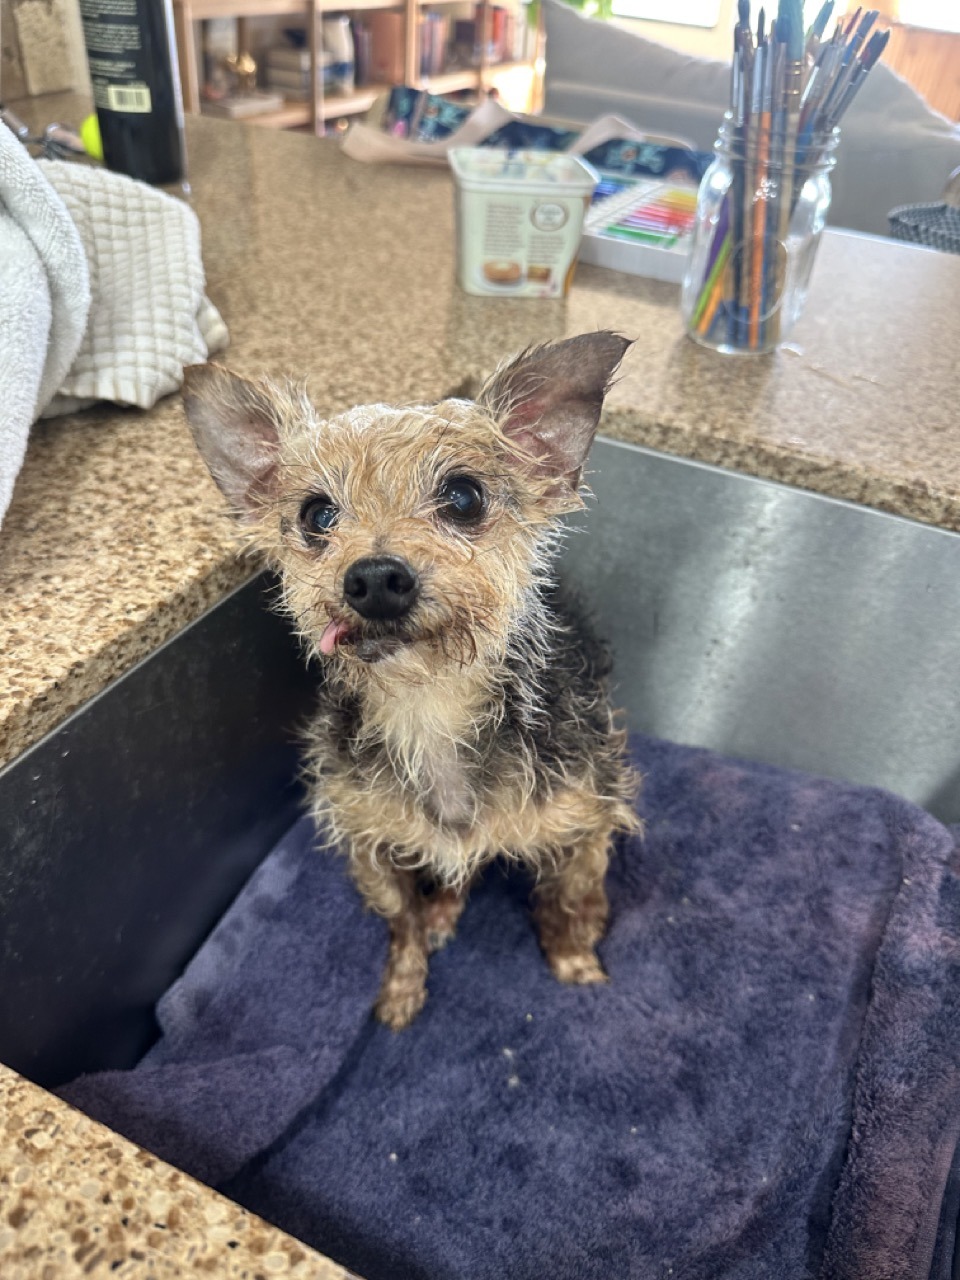 A yorkie with his tongue sticking out getting a bath